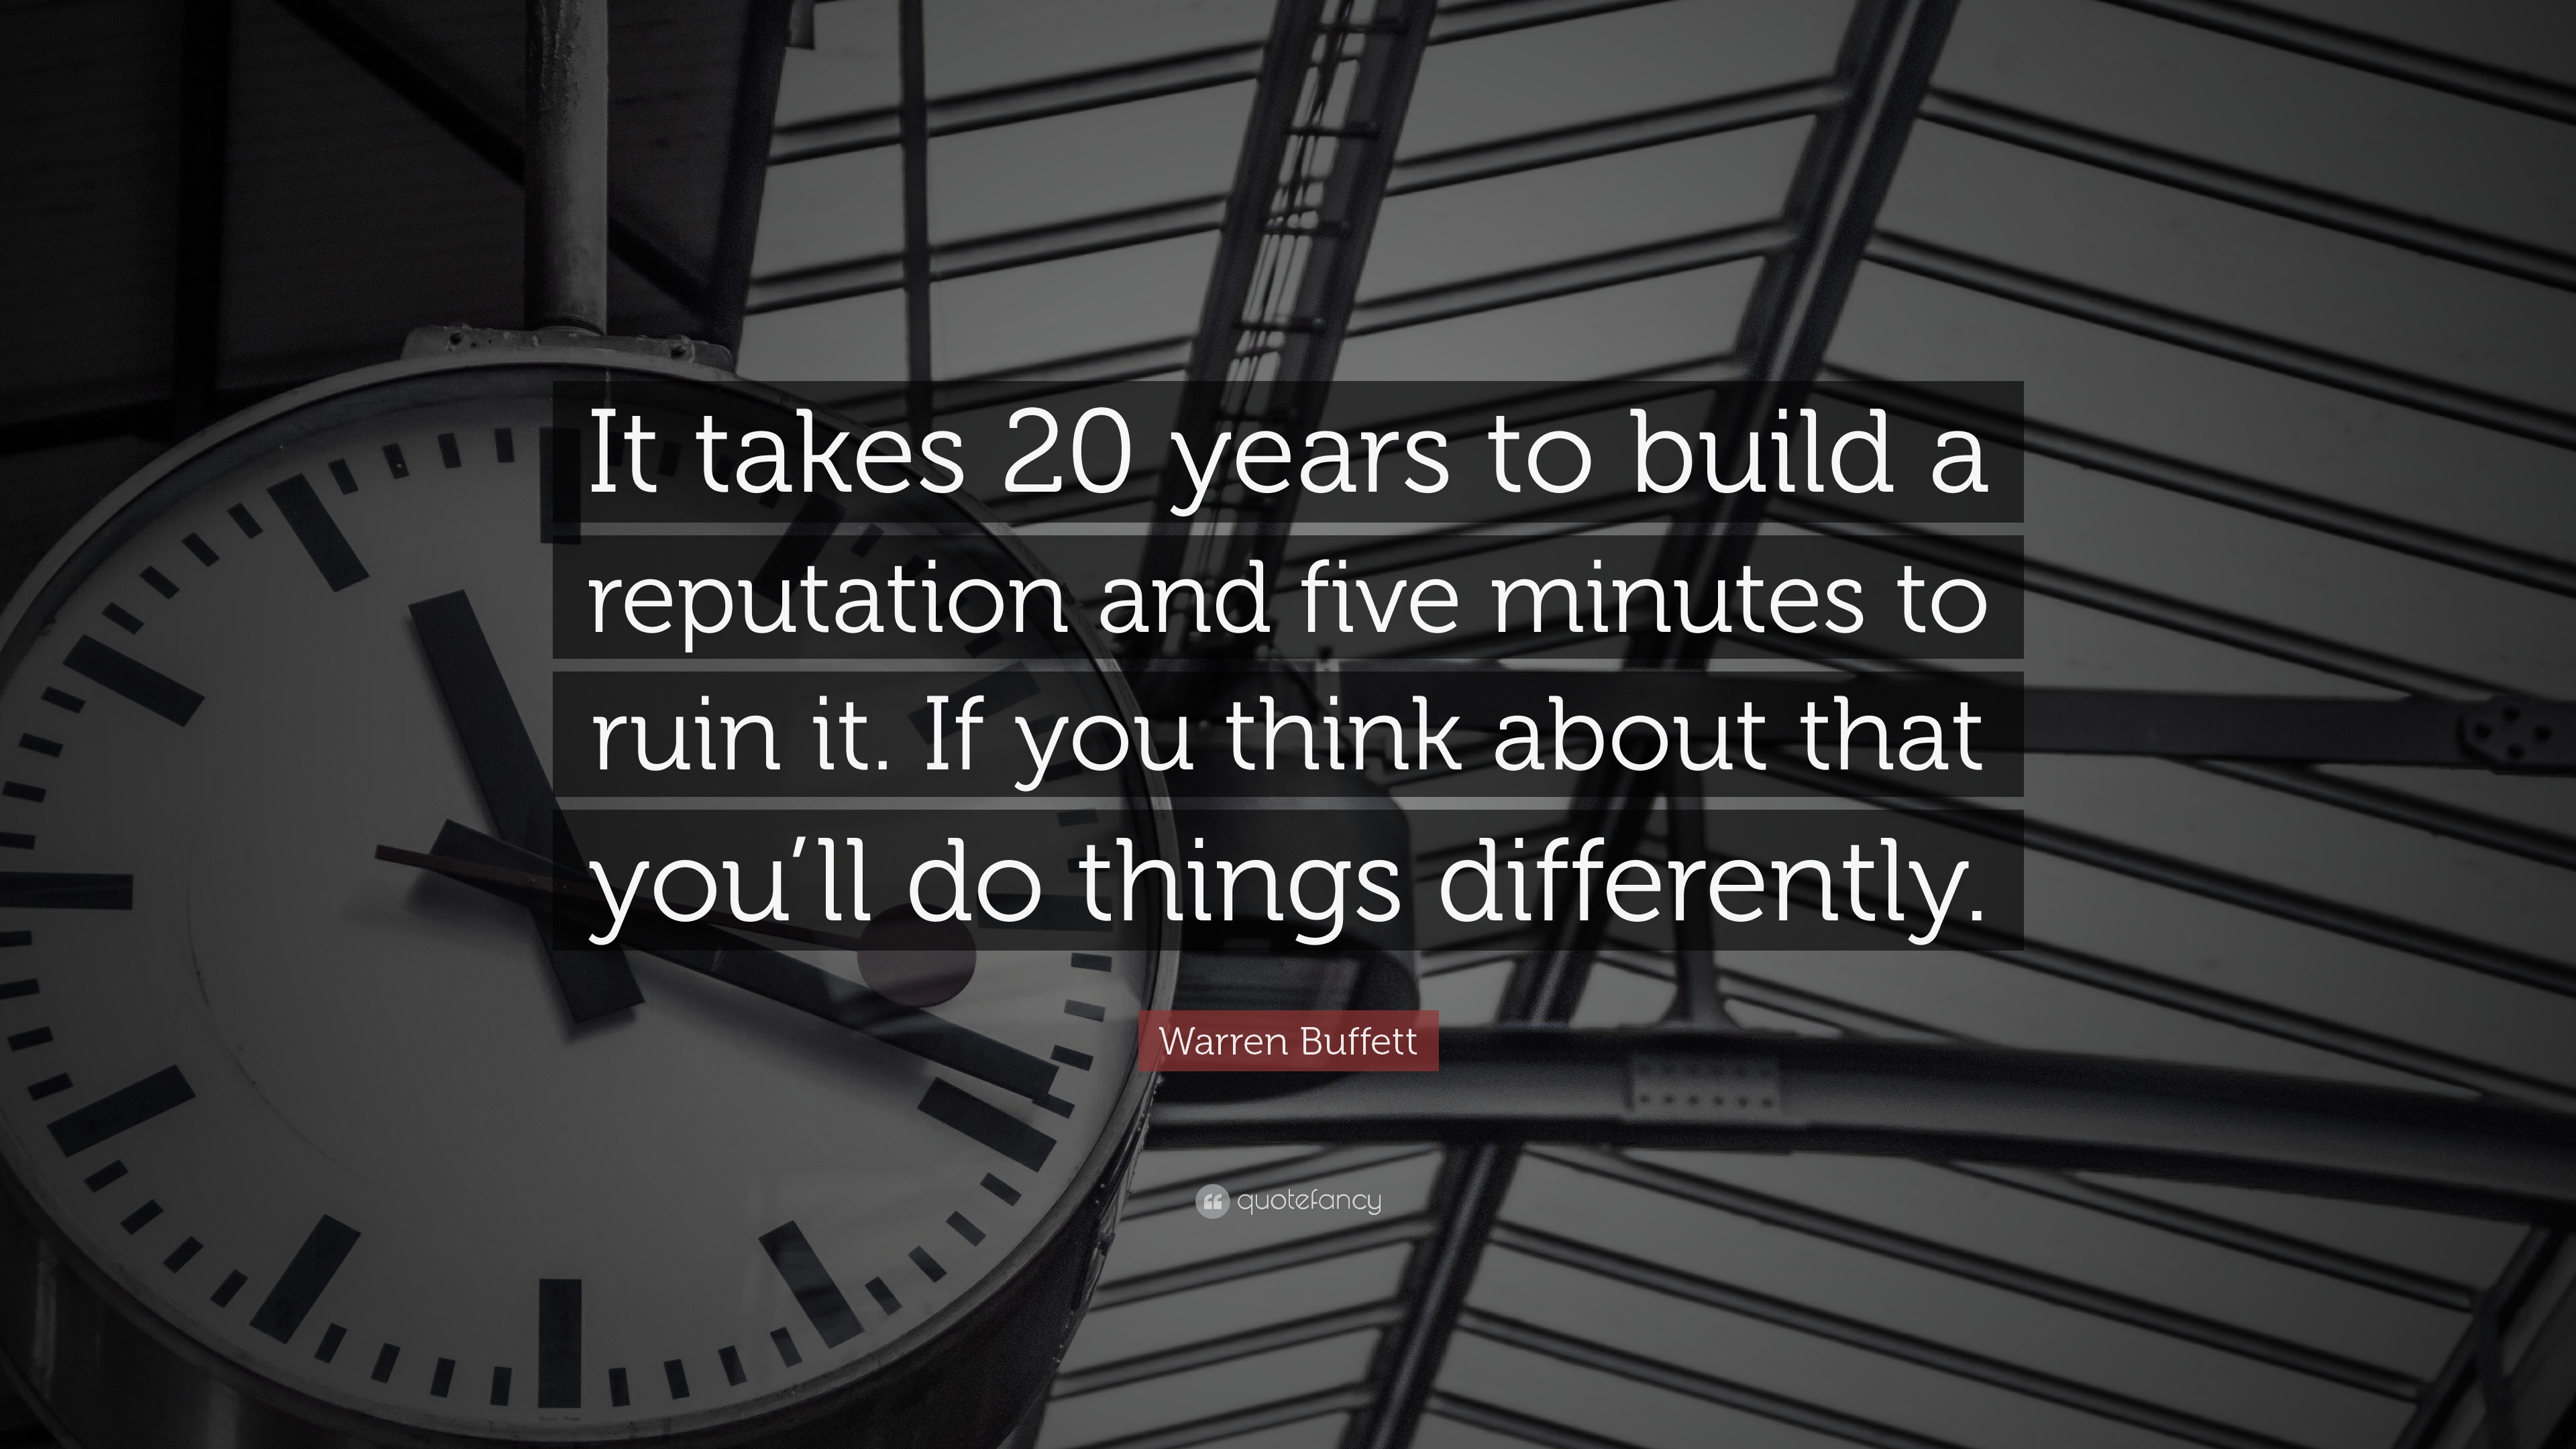 It takes 20 years to build a reputation and five minutes to ruin it. If you think about that, you’ll do things differently.